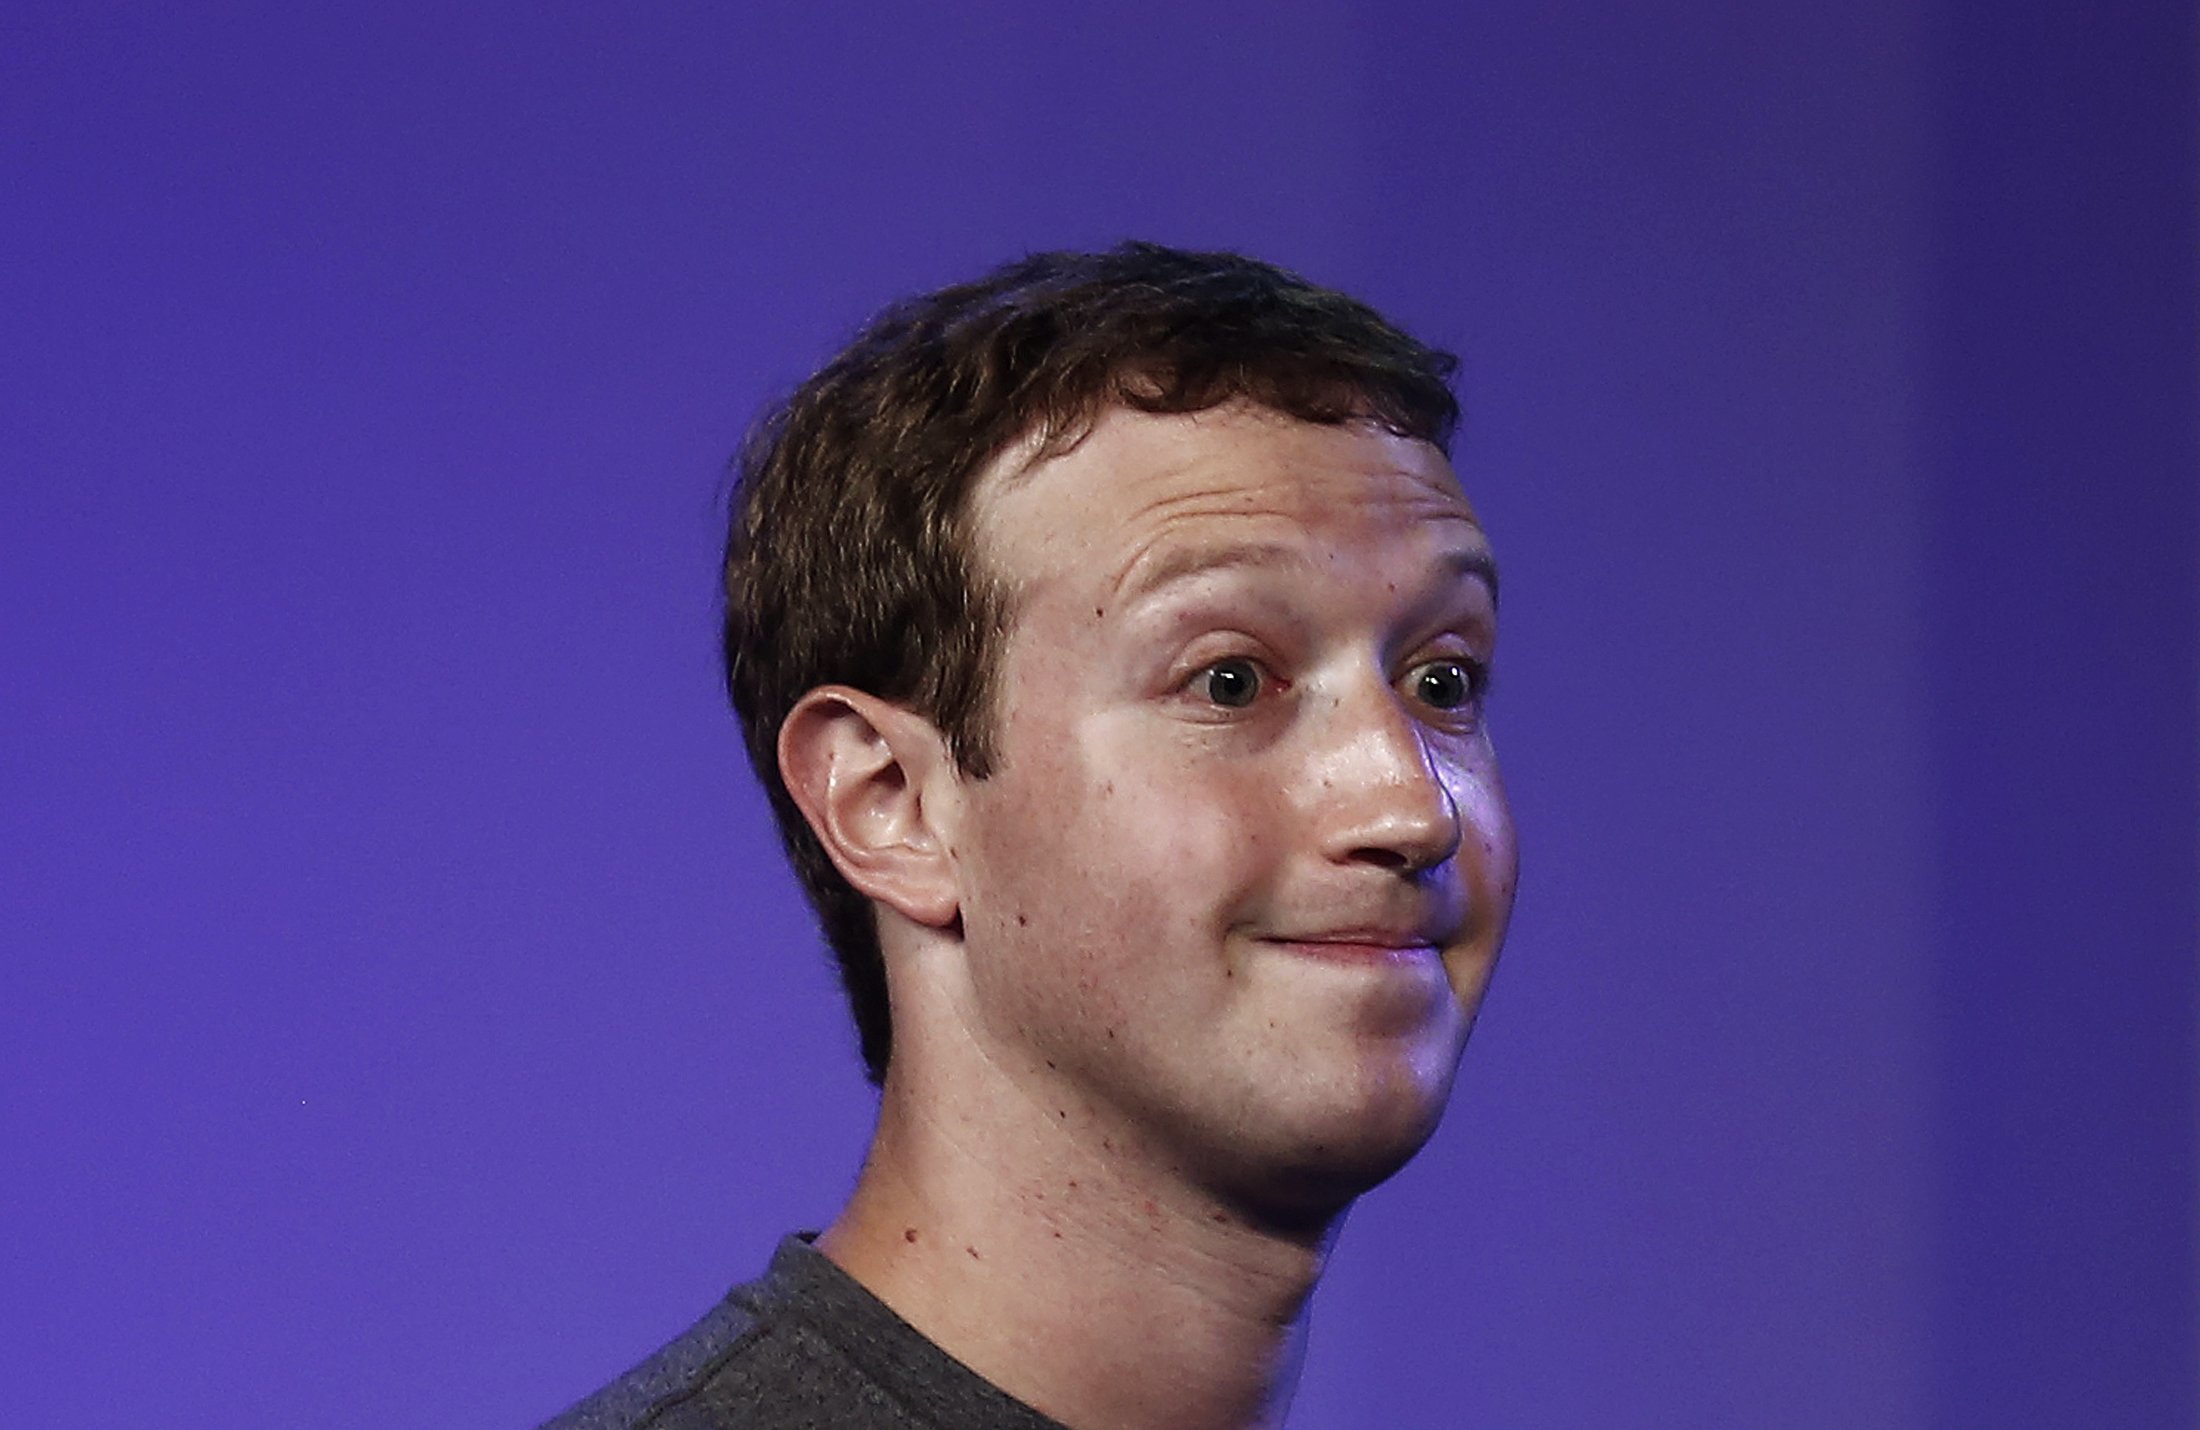 Mark Zuckerberg boasted that people spend much less time on Facebook